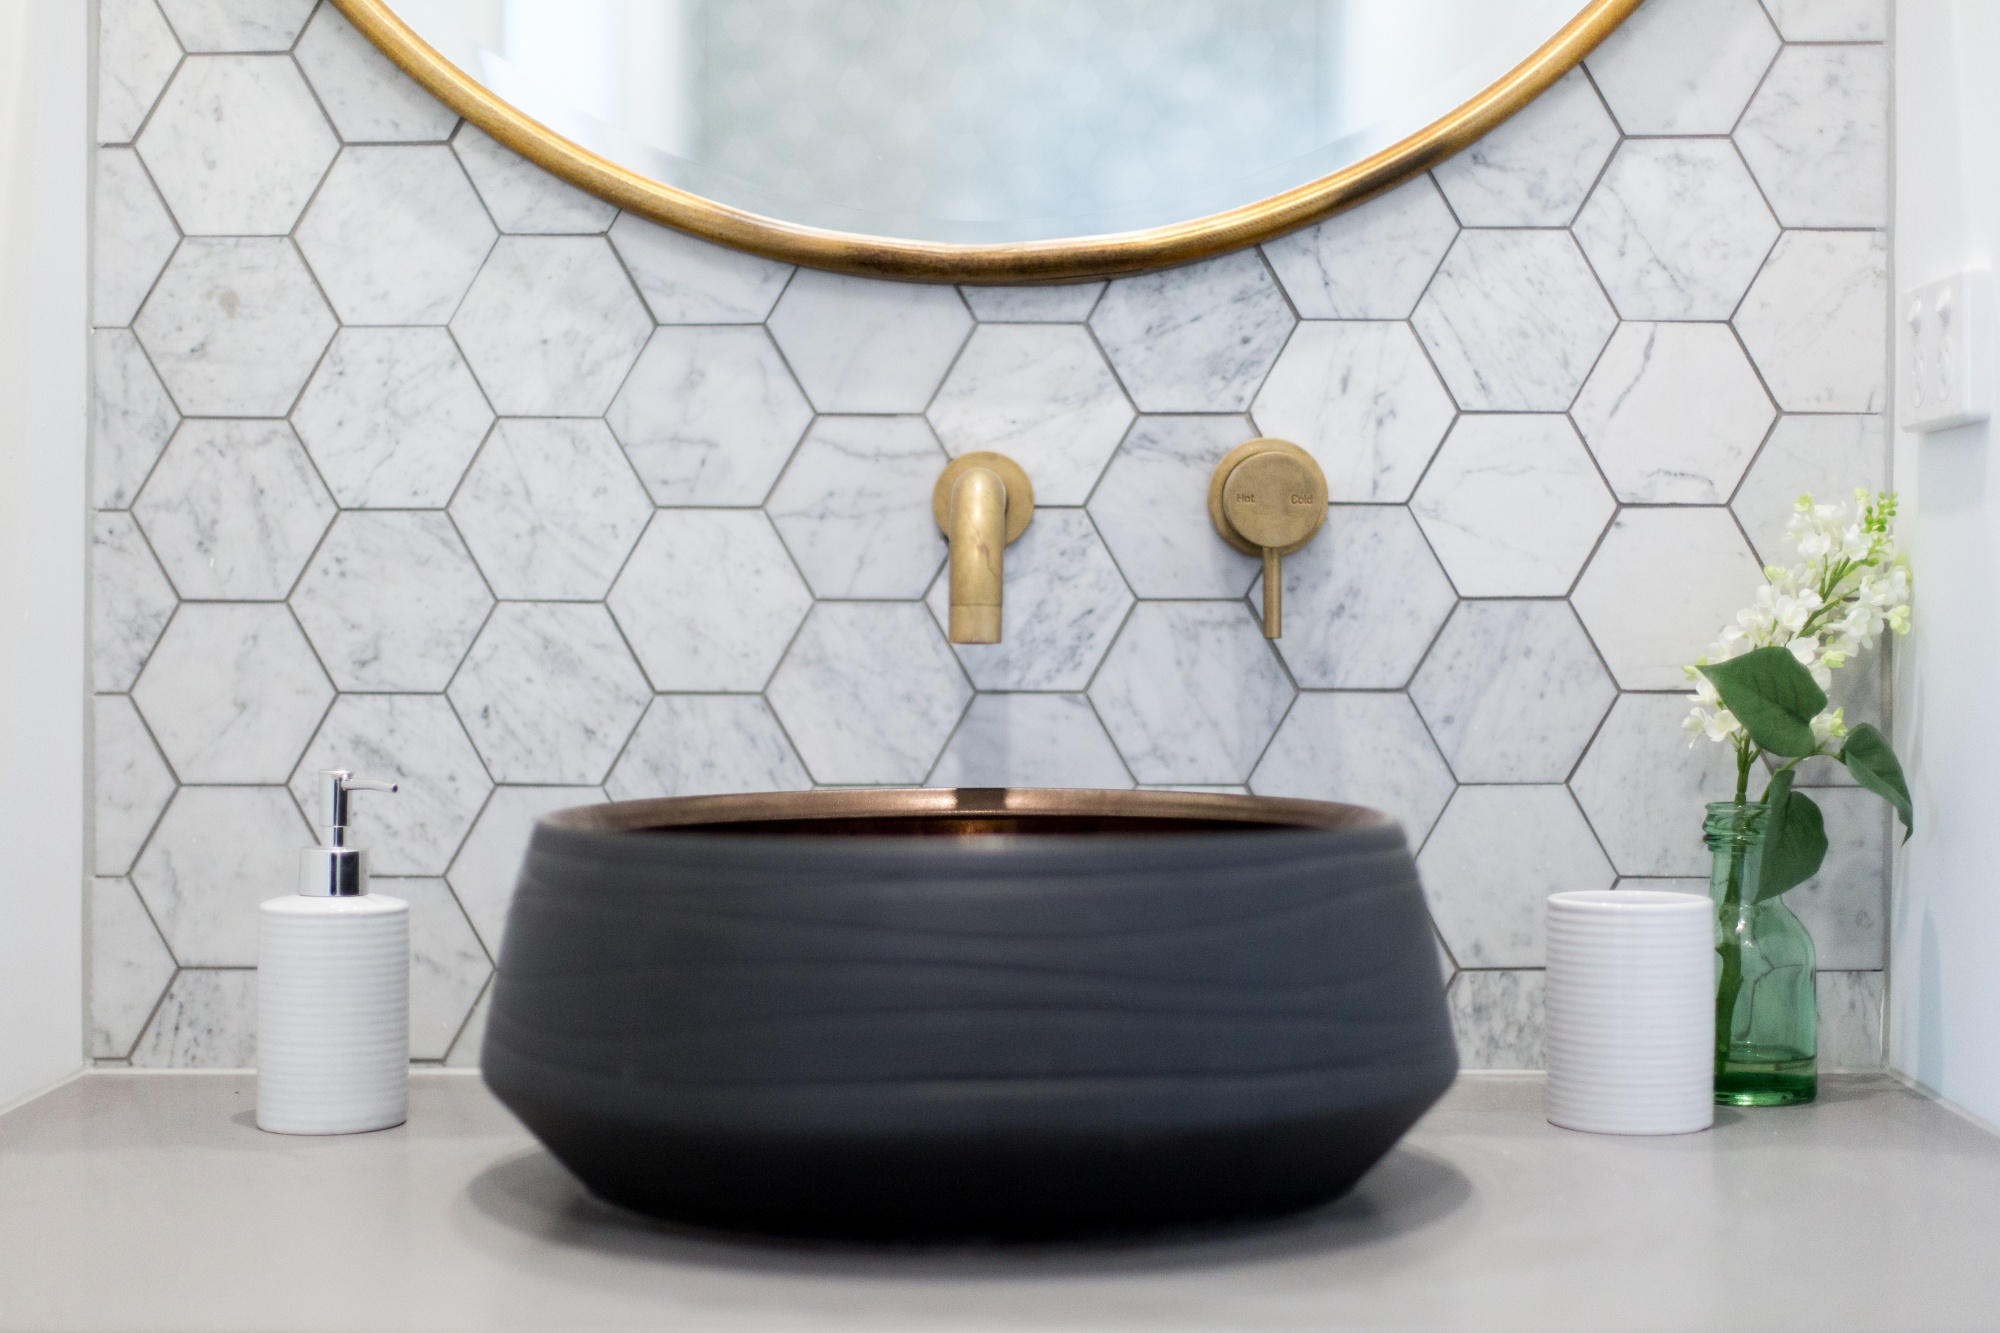 How To Update Your Powder Room With These 4 Easy Changes featuring an updated vanity with a large, round, brass mirror, small vase of flowers and white soap dispenser